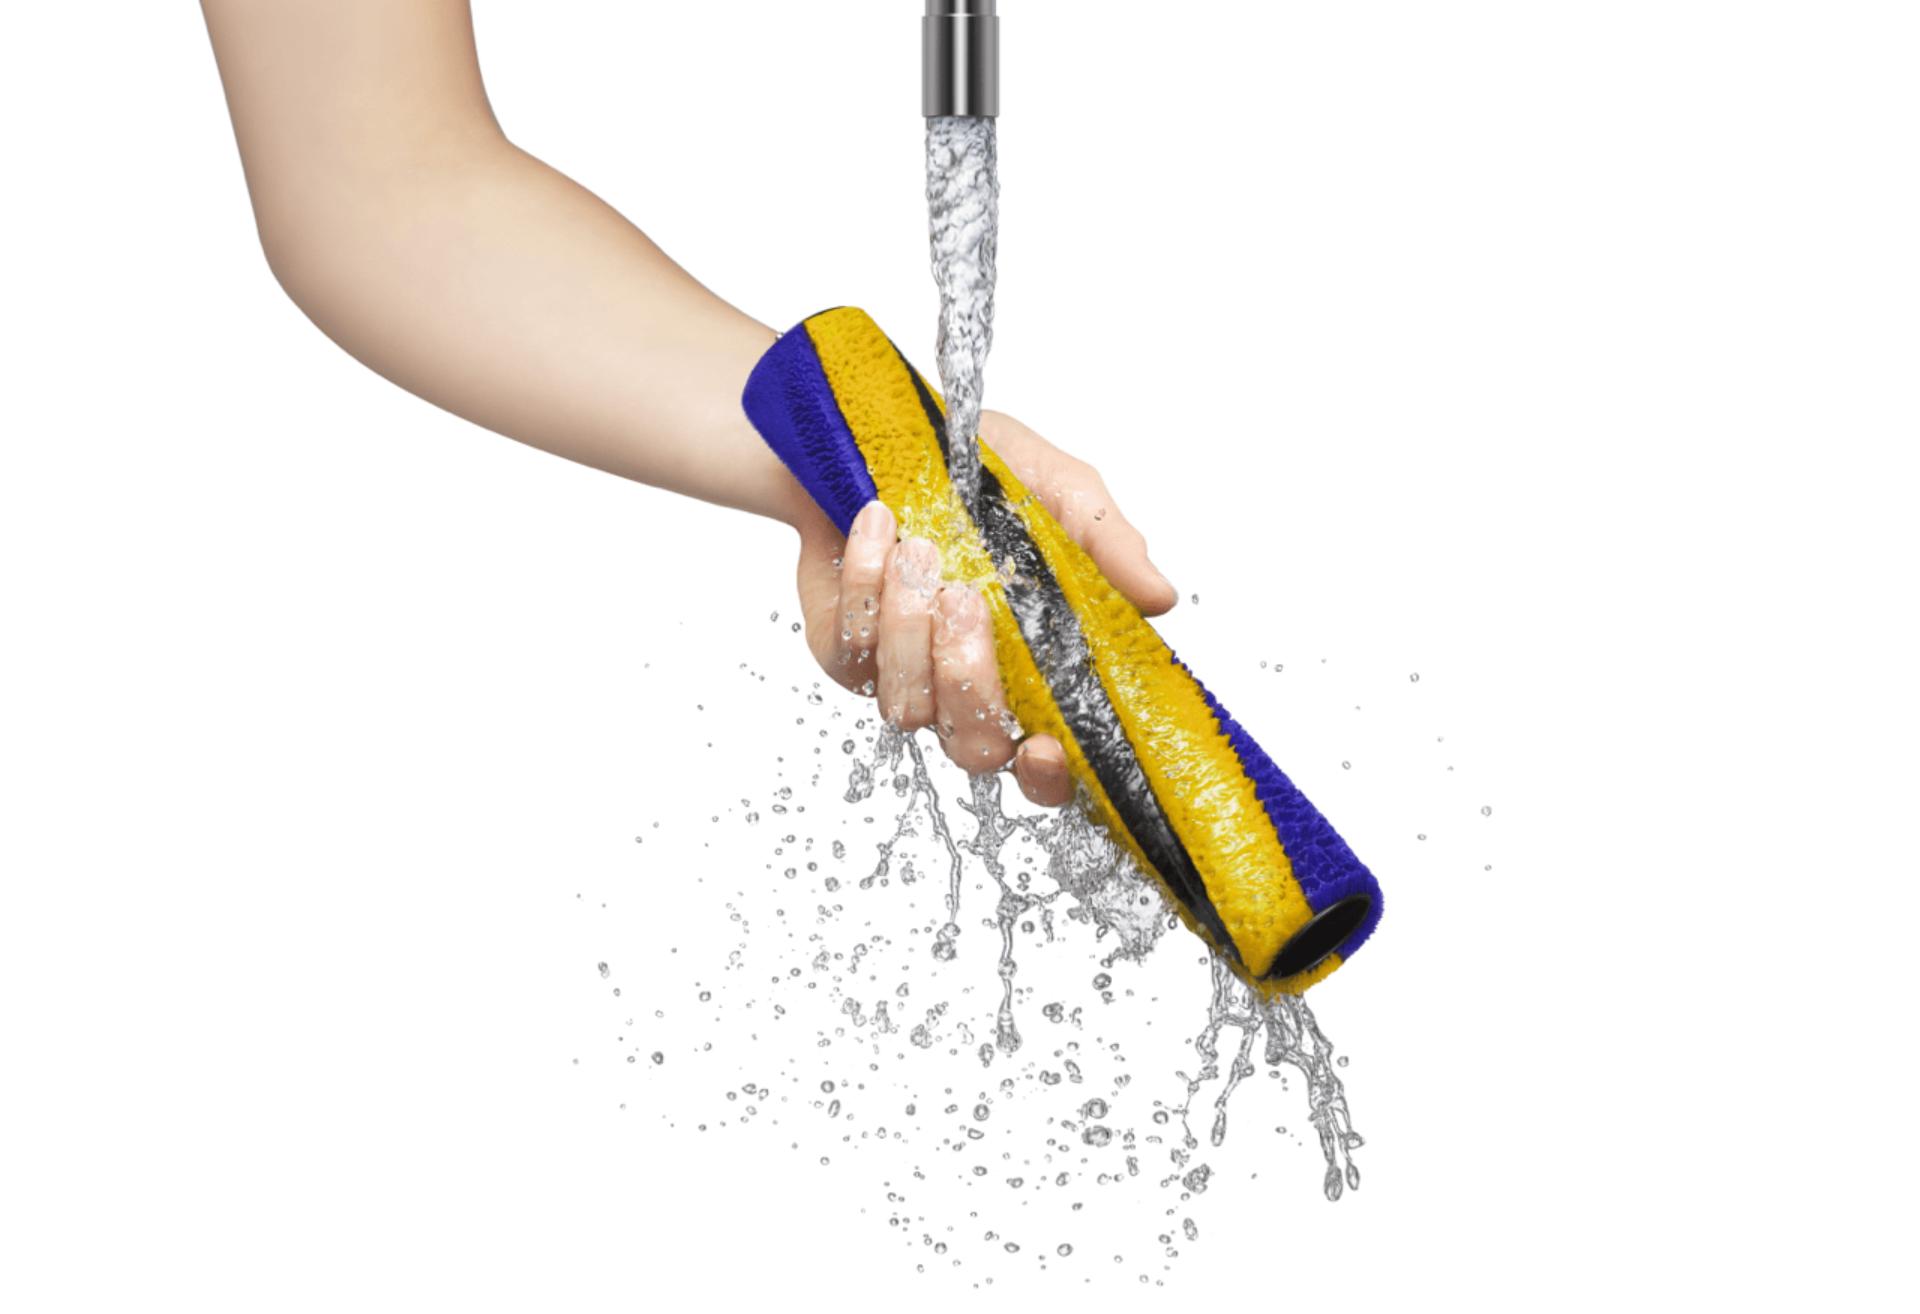 Image from video about washing the Soft roller cleaner head